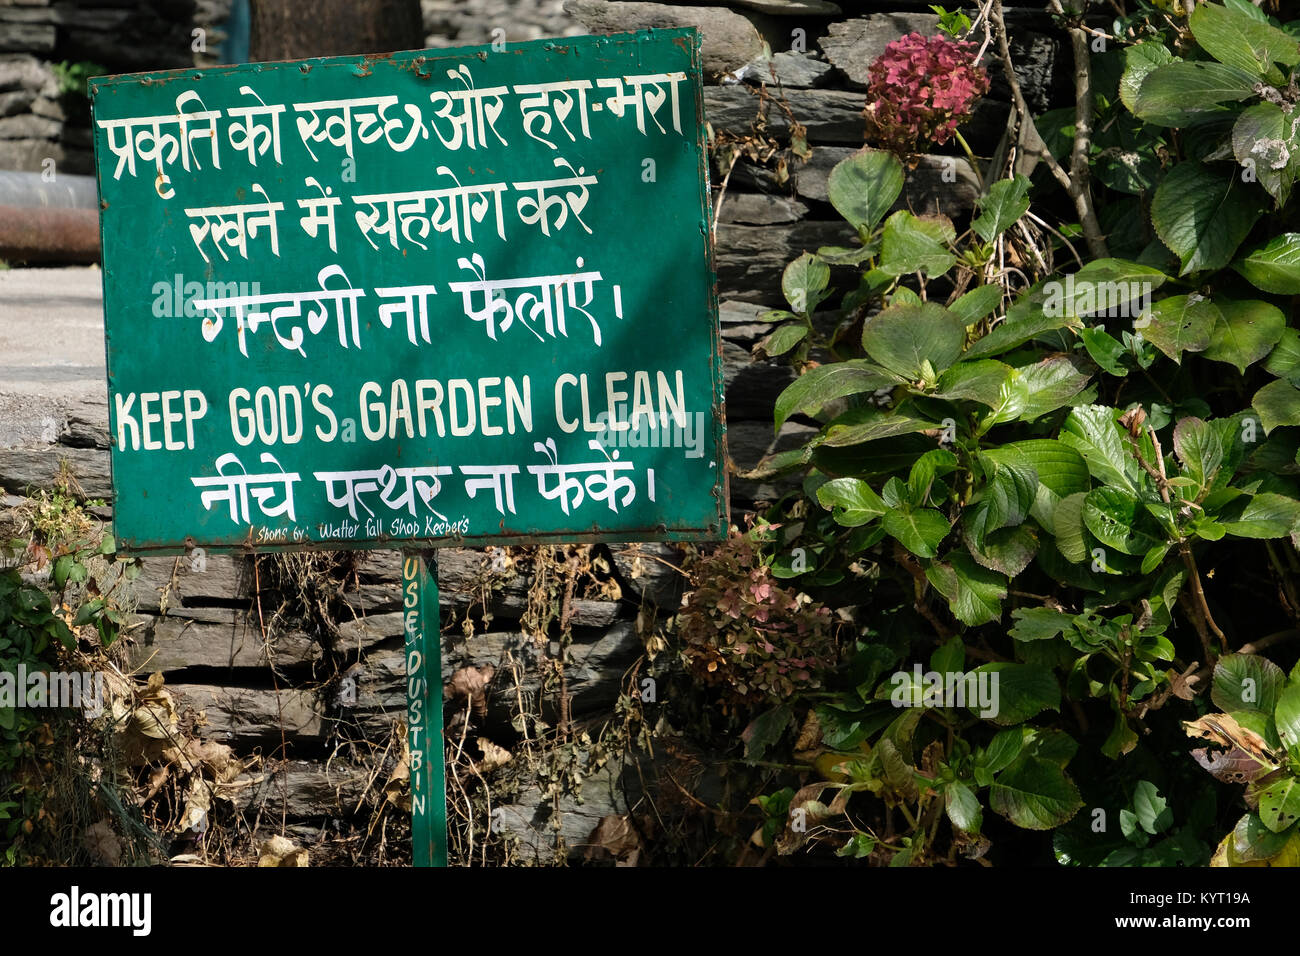 A sign encouraging care of the environment, northern India Stock Photo